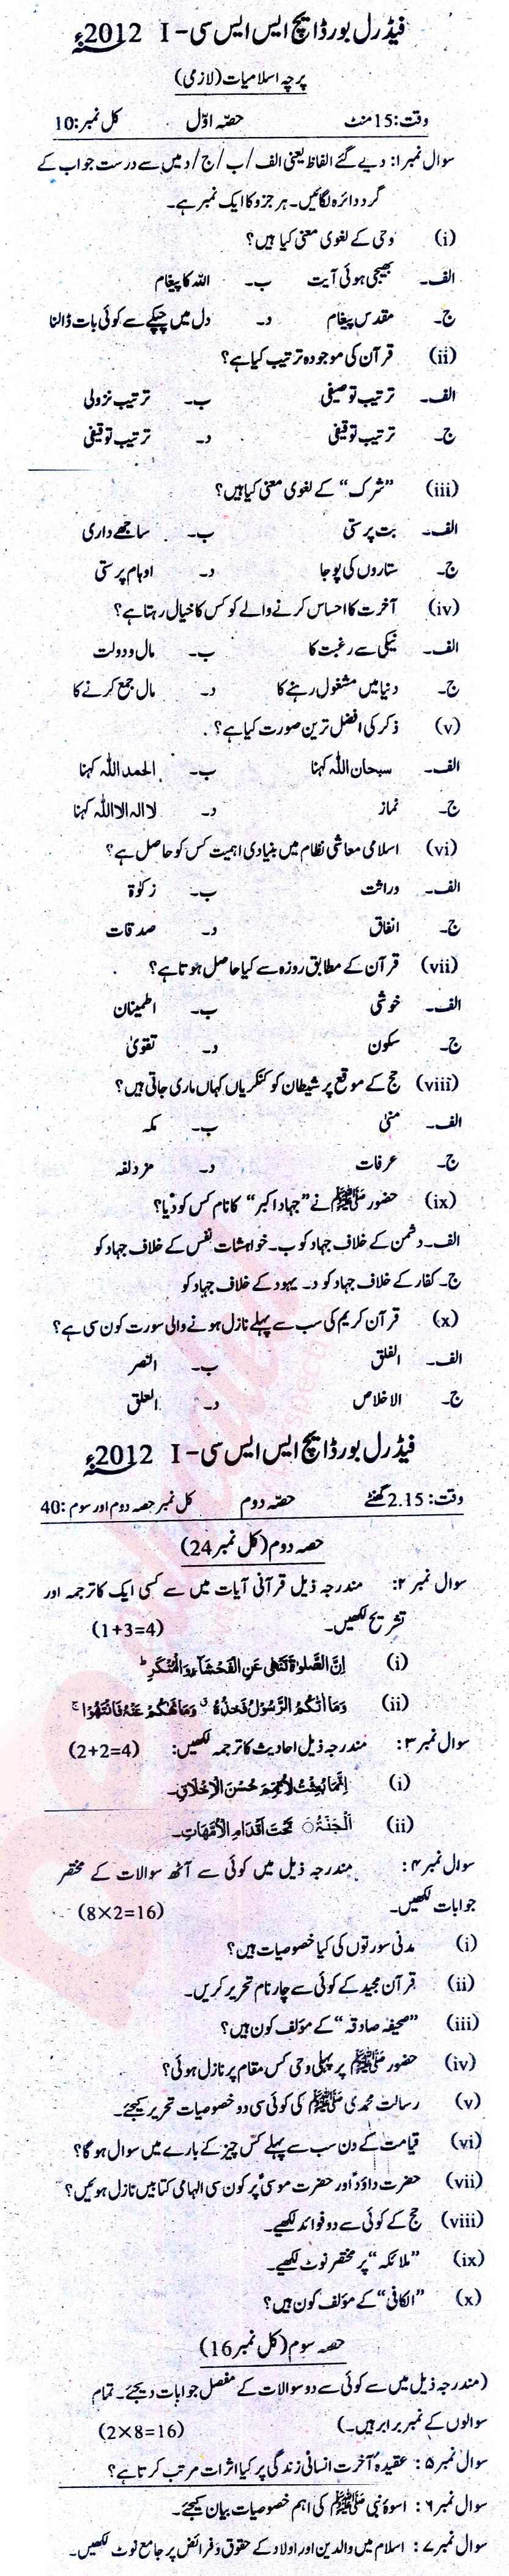 Islamiat (Compulsory) 11th class Past Paper Group 1 Federal BISE  2012